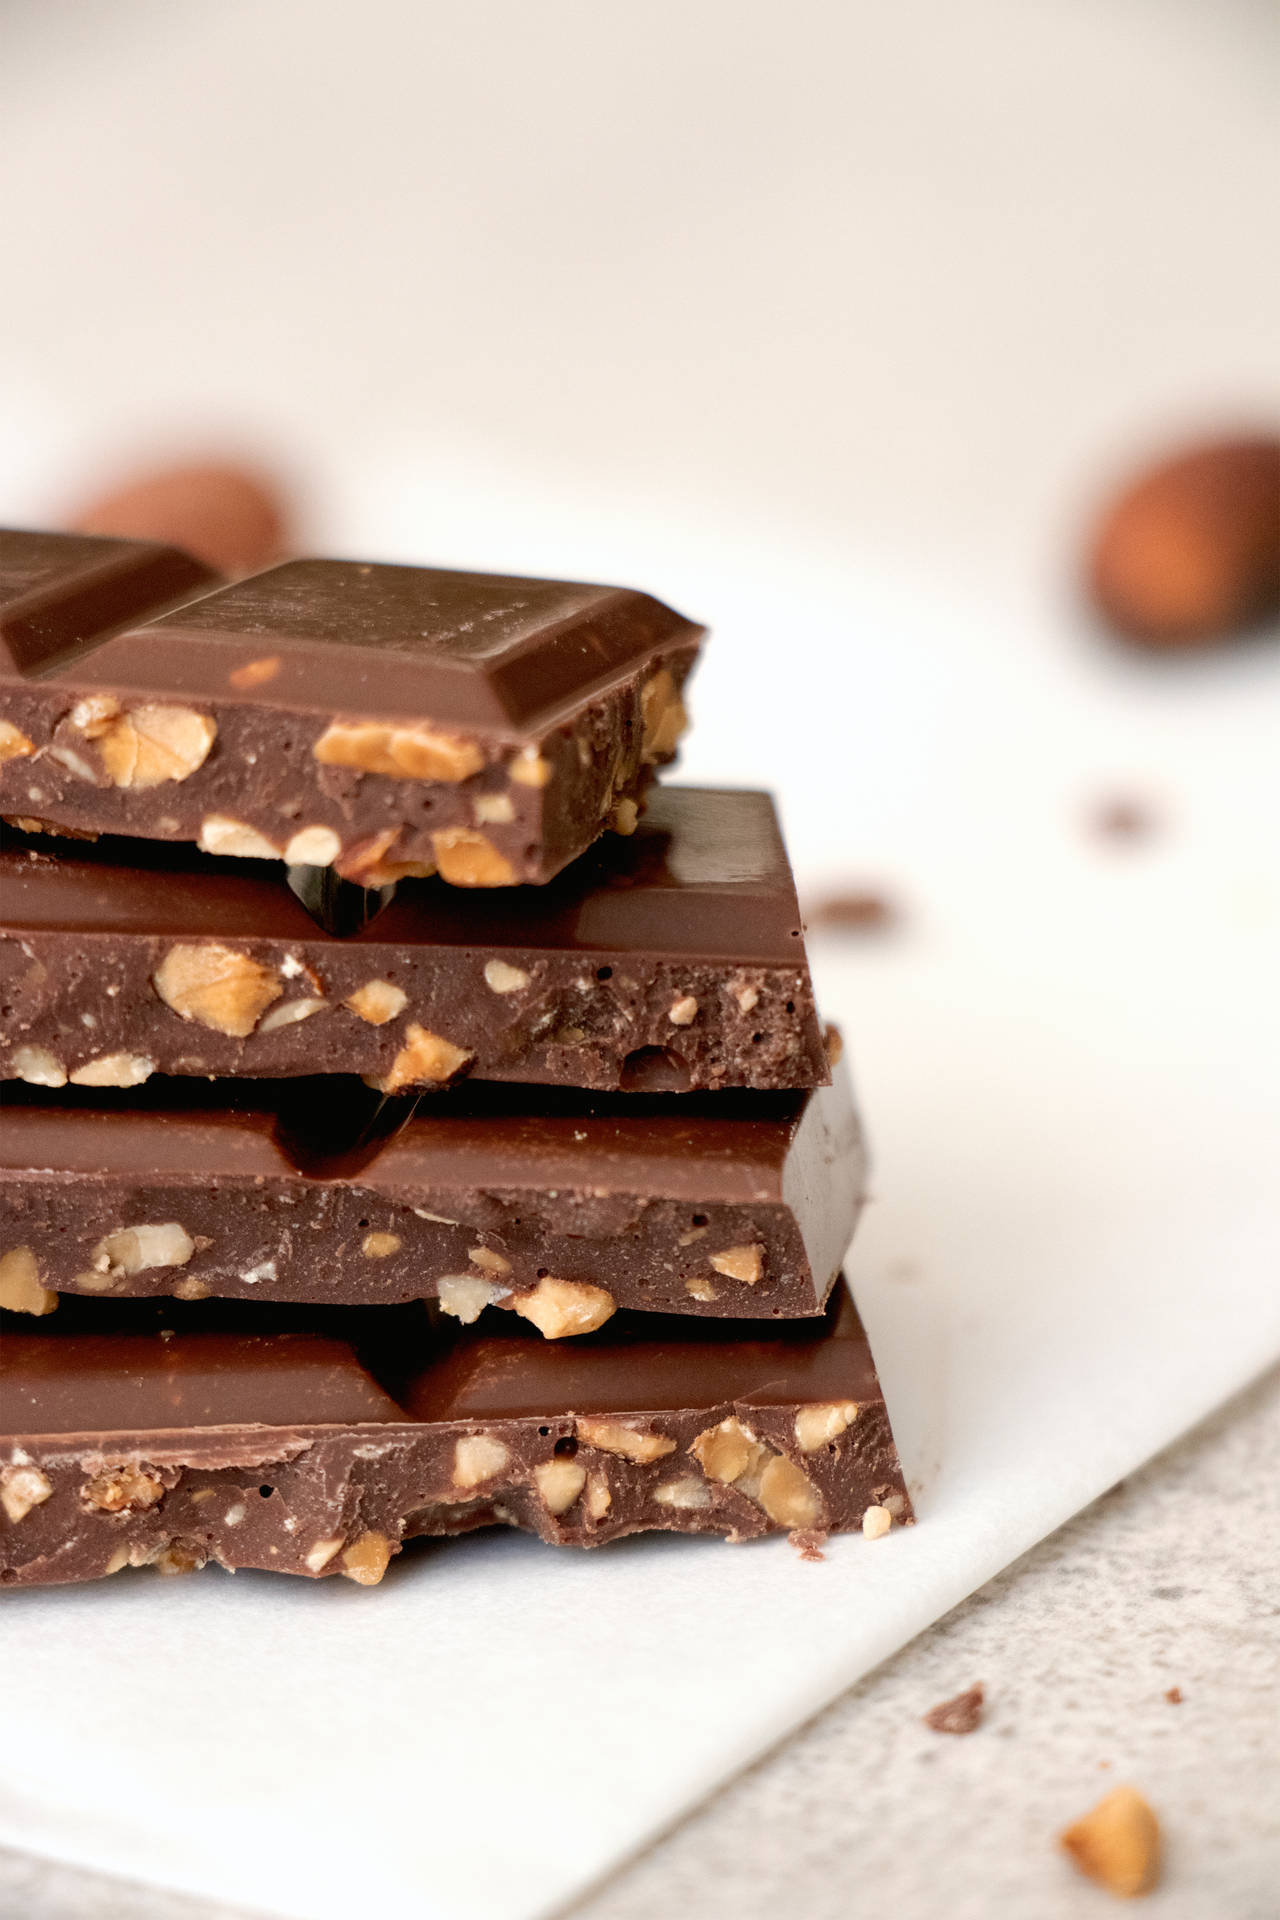 Chocolate Bars With Nuts Background